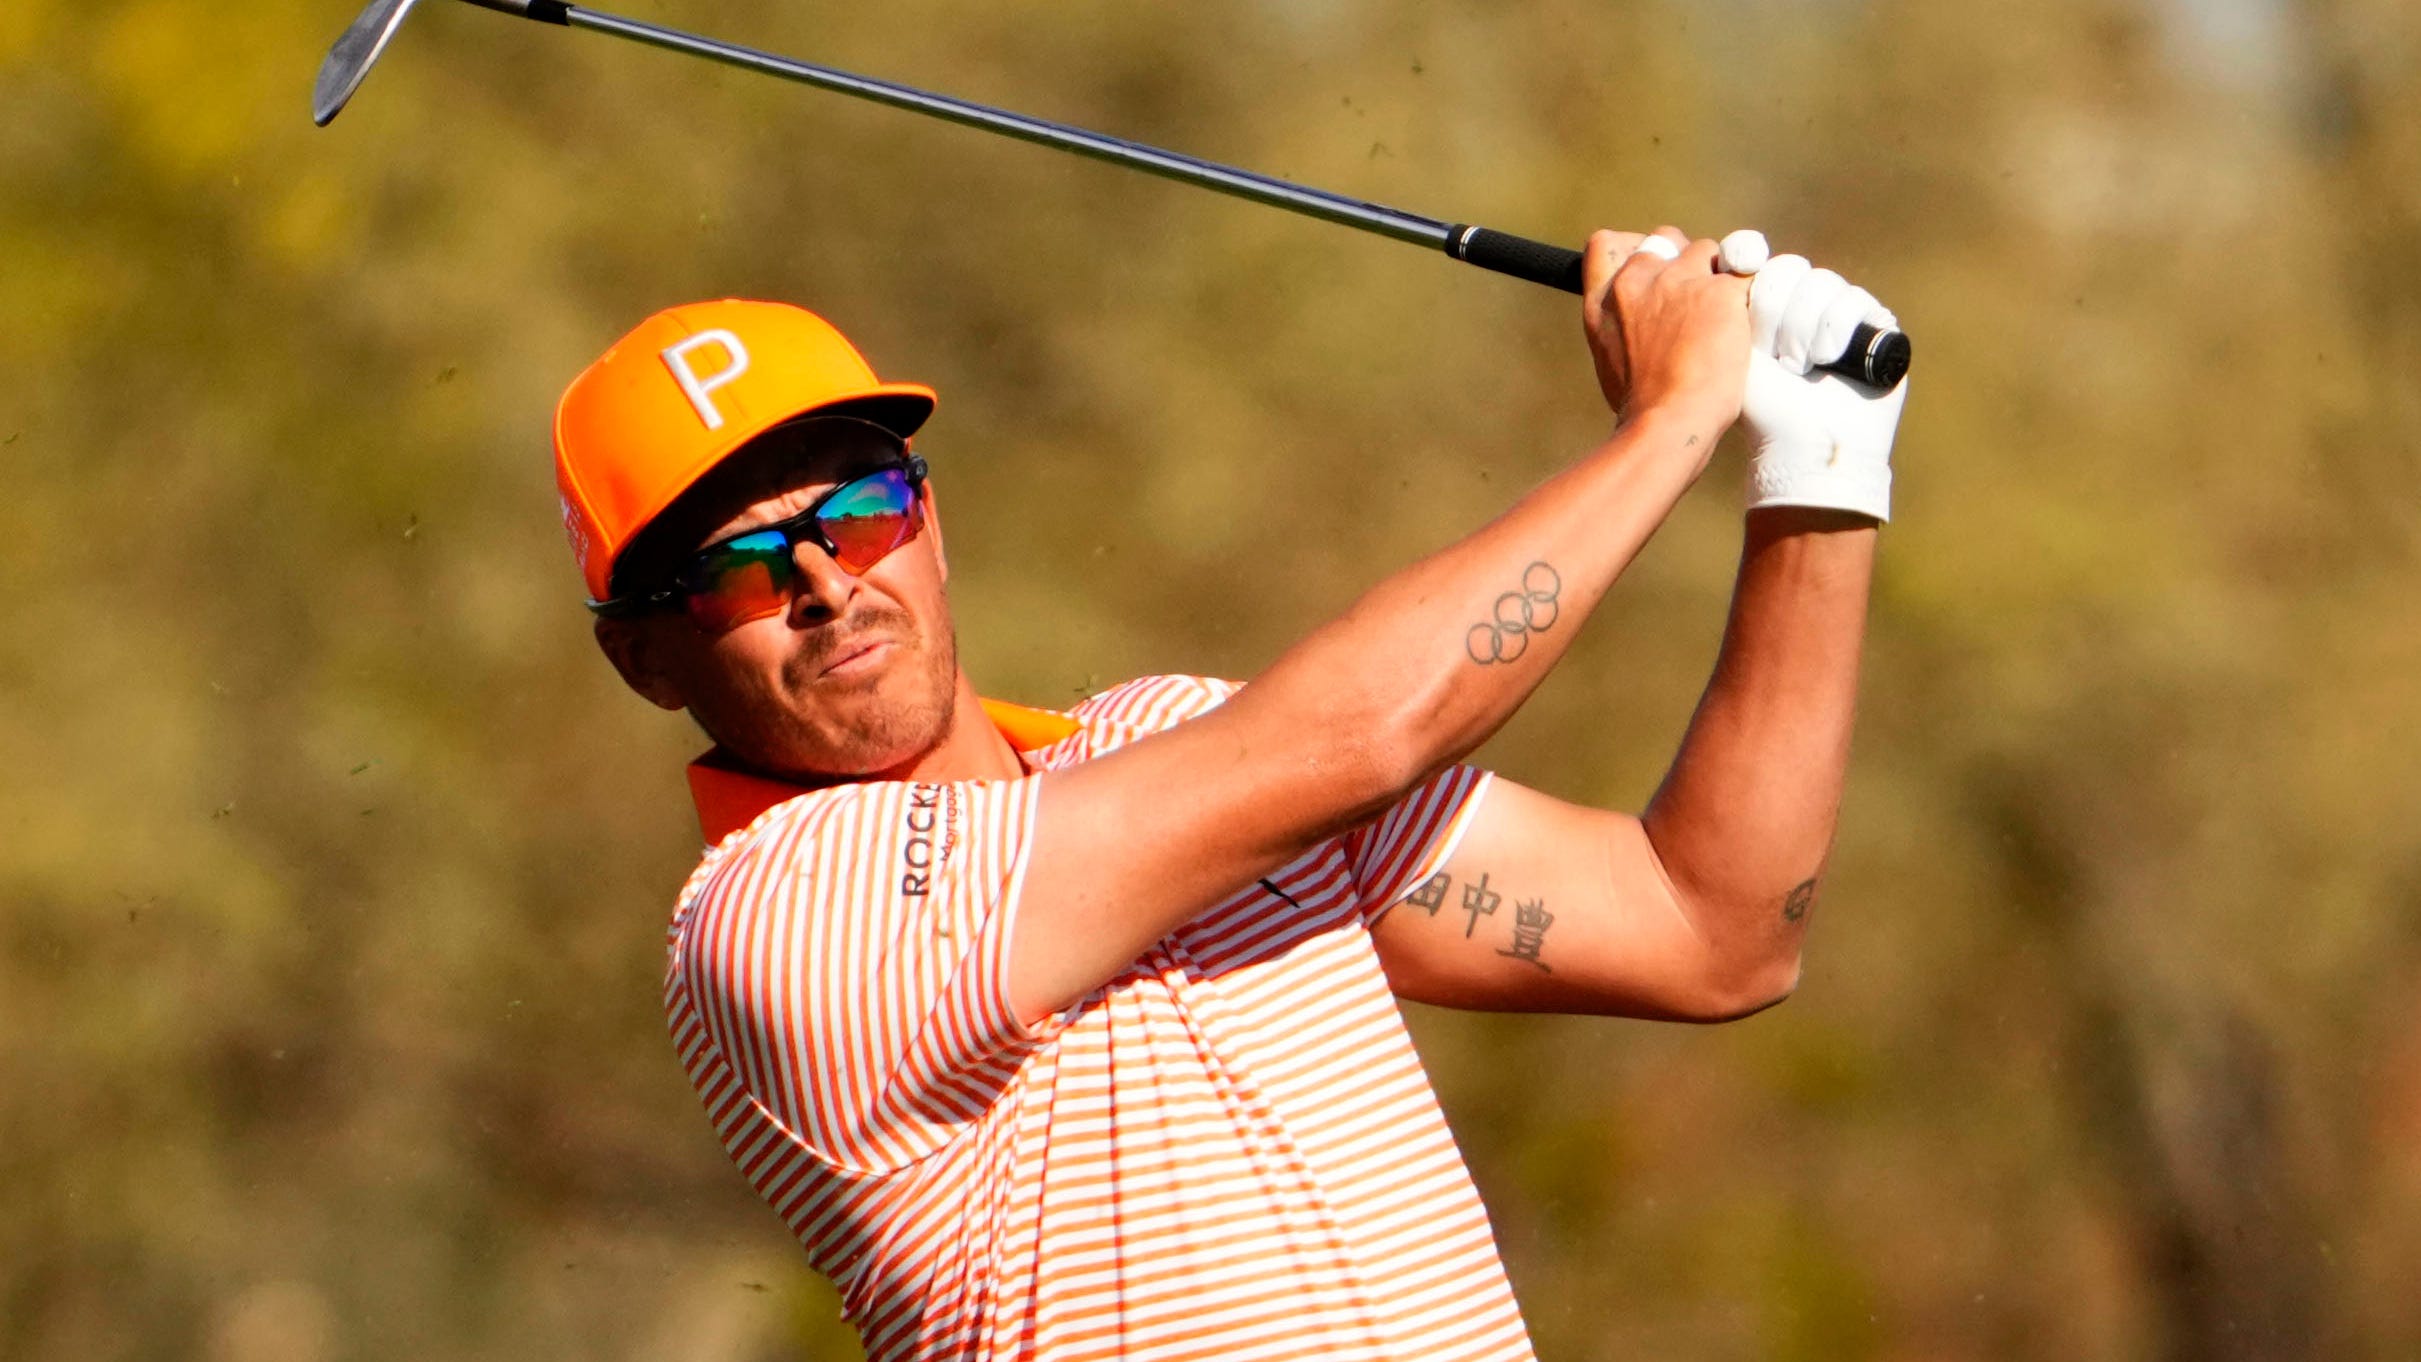  Rickie Fowler thrills crowd at No. 7 with hole-in-one during final round of Phoenix Open 